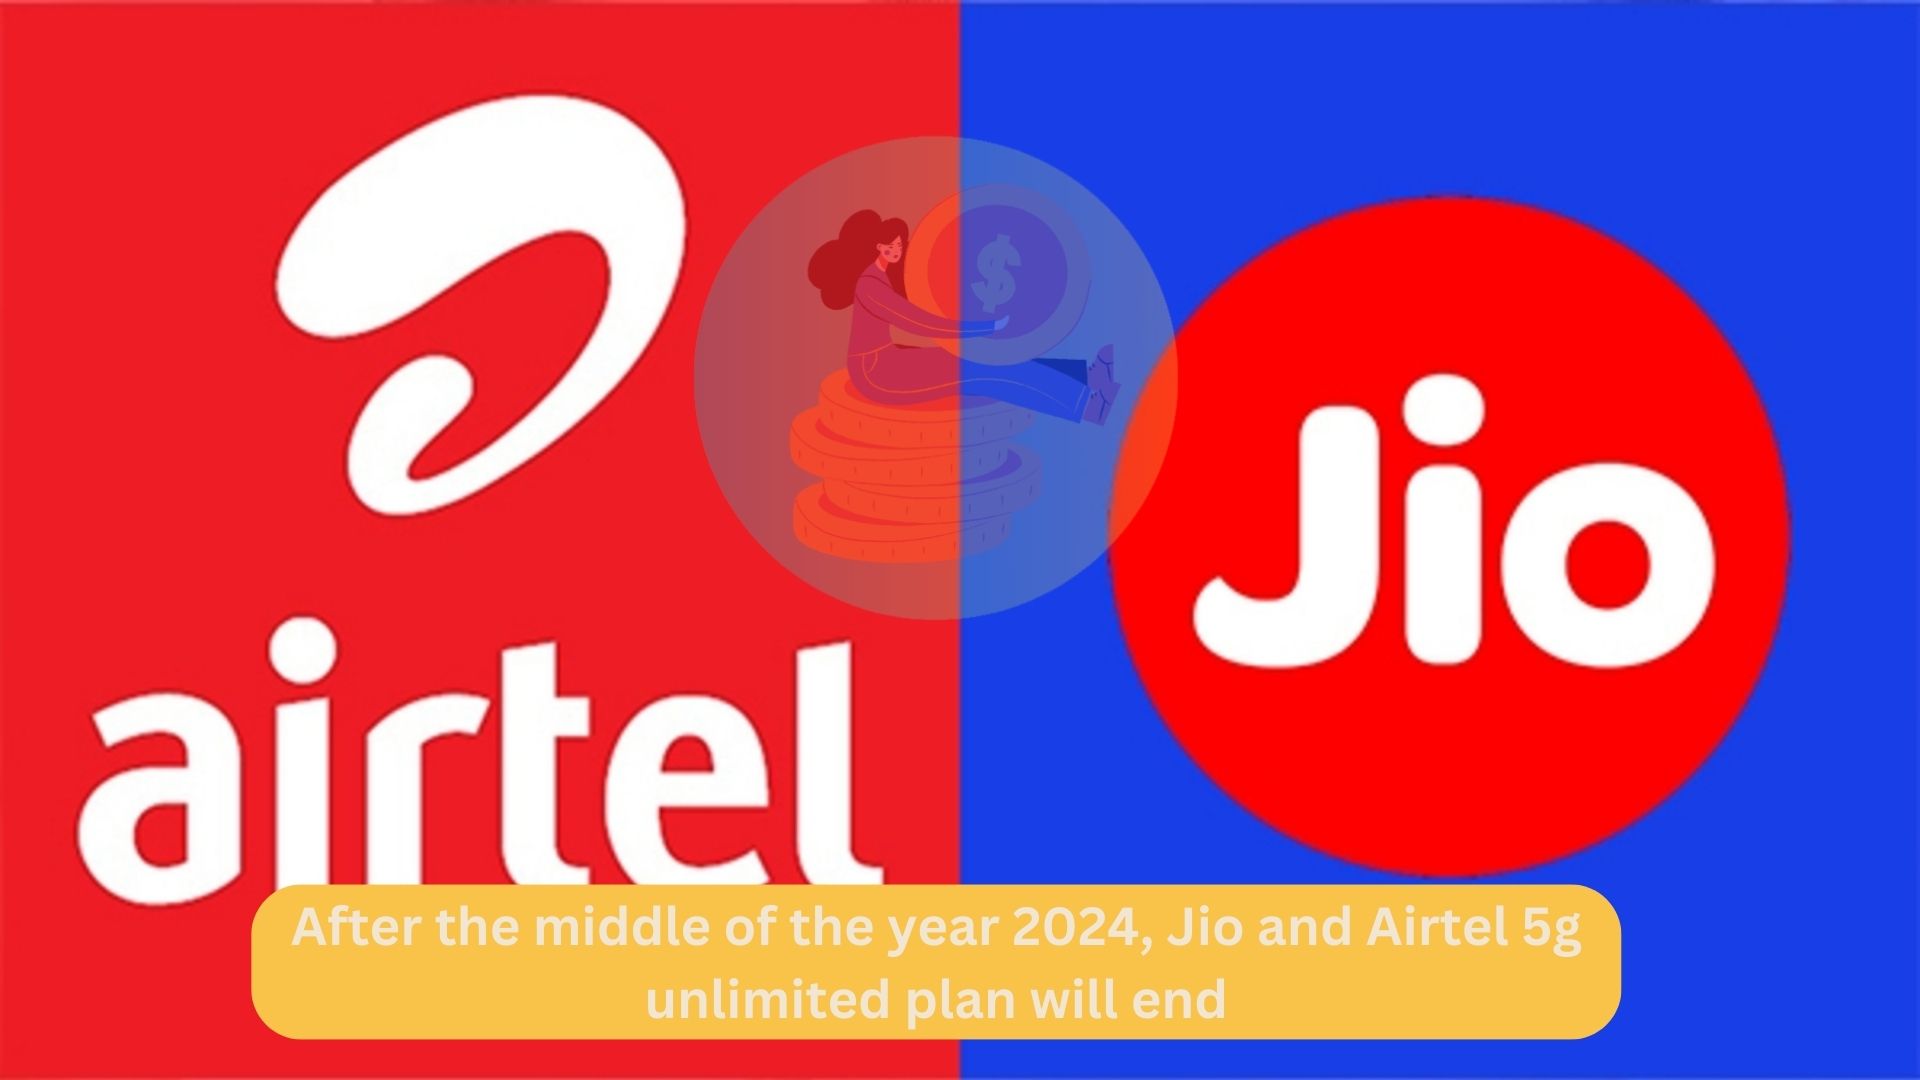 Jio and Airtel 5g unlimited plan will end